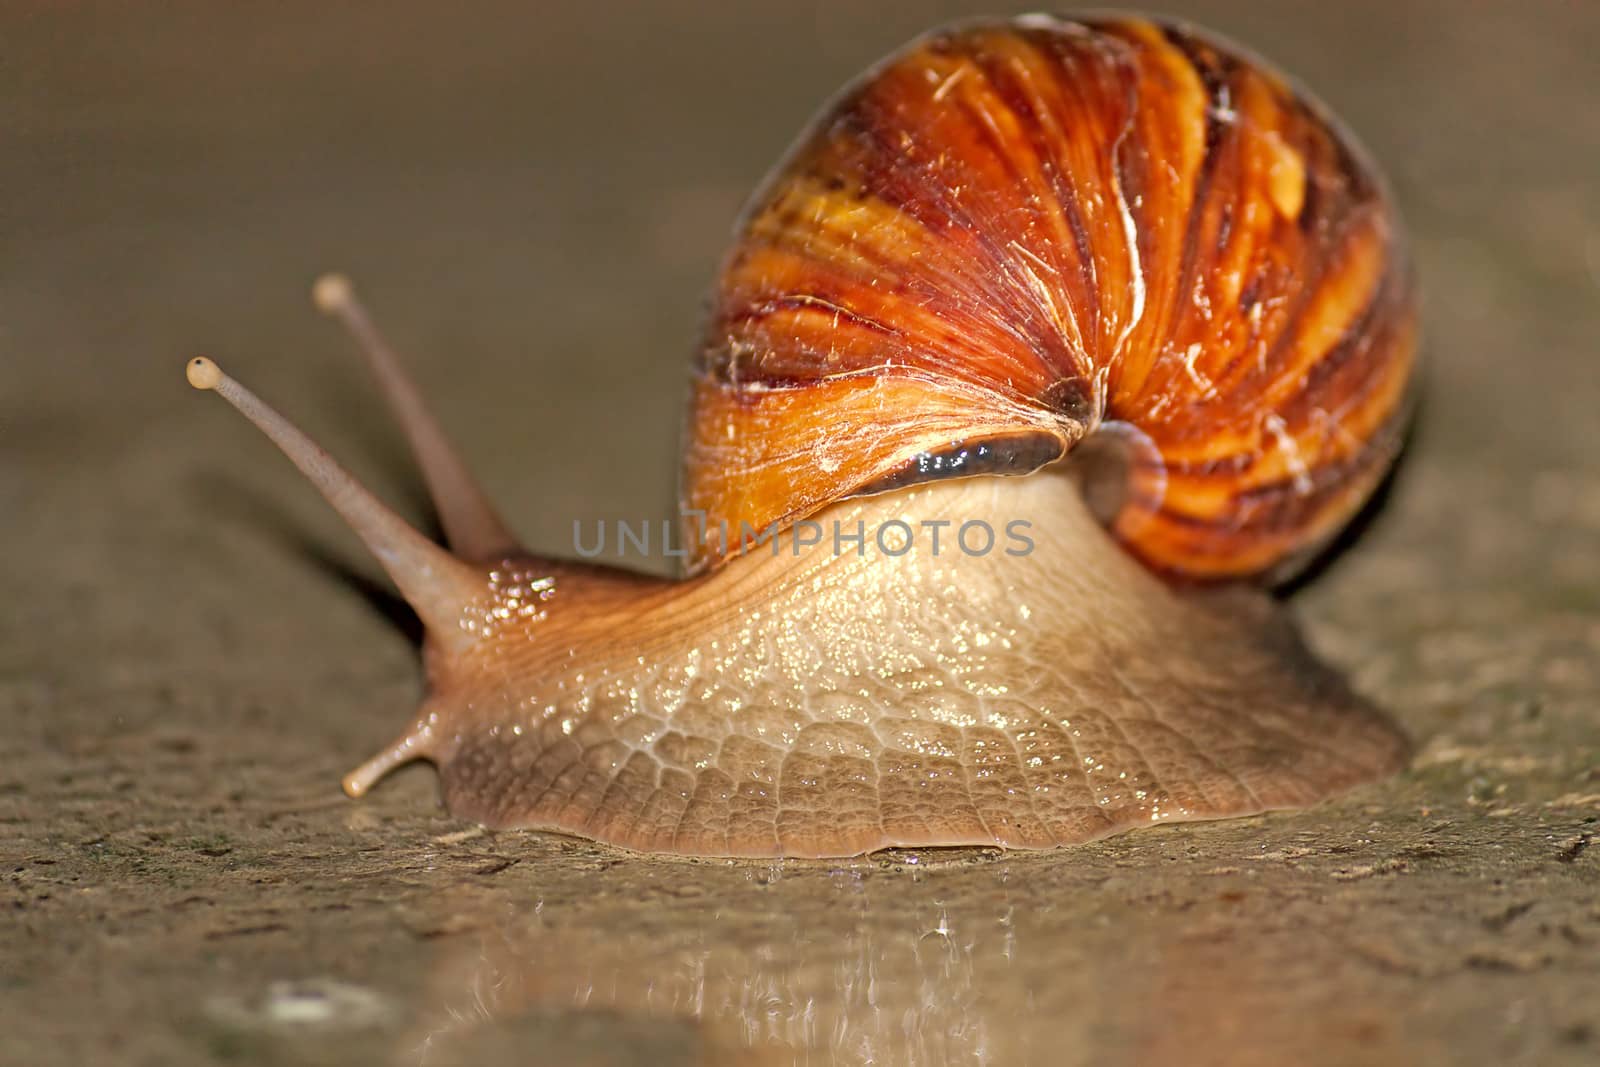 Large snail with  beautiful shell closeup on ground.Shot with shallow depth of field.